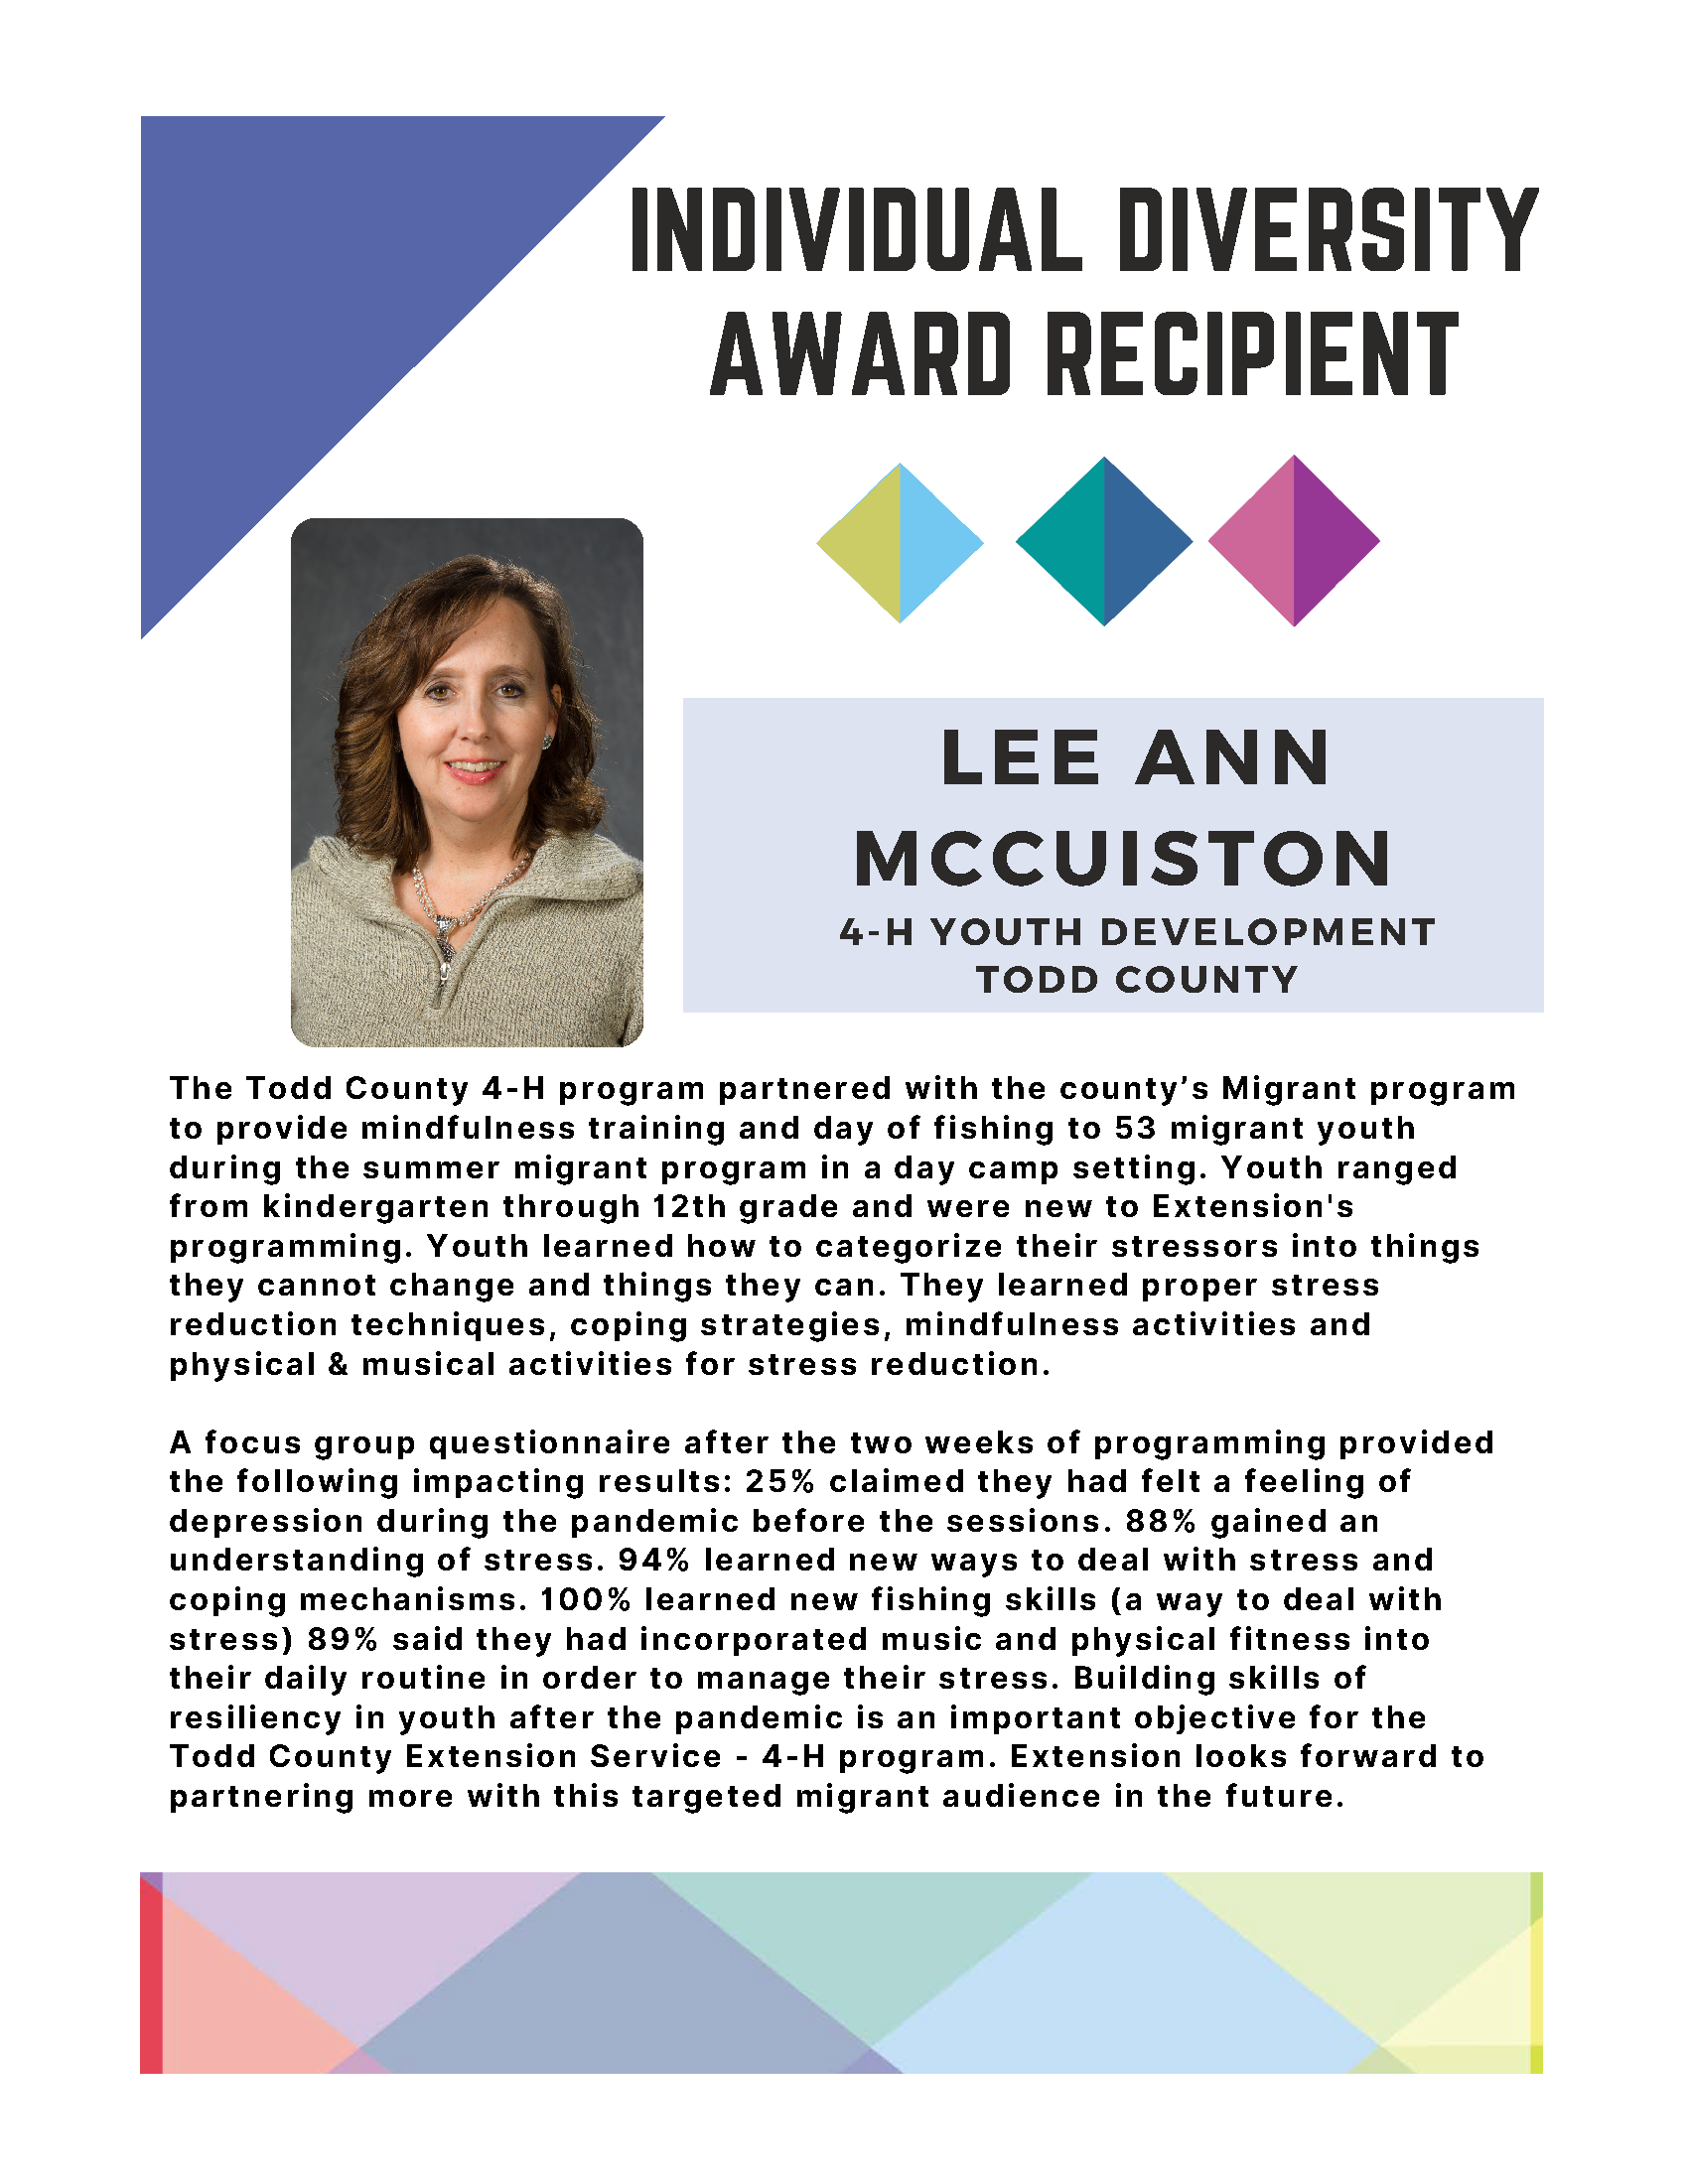 Document about the Individual Diversity Award Recipient, Lee Ann McCuiston